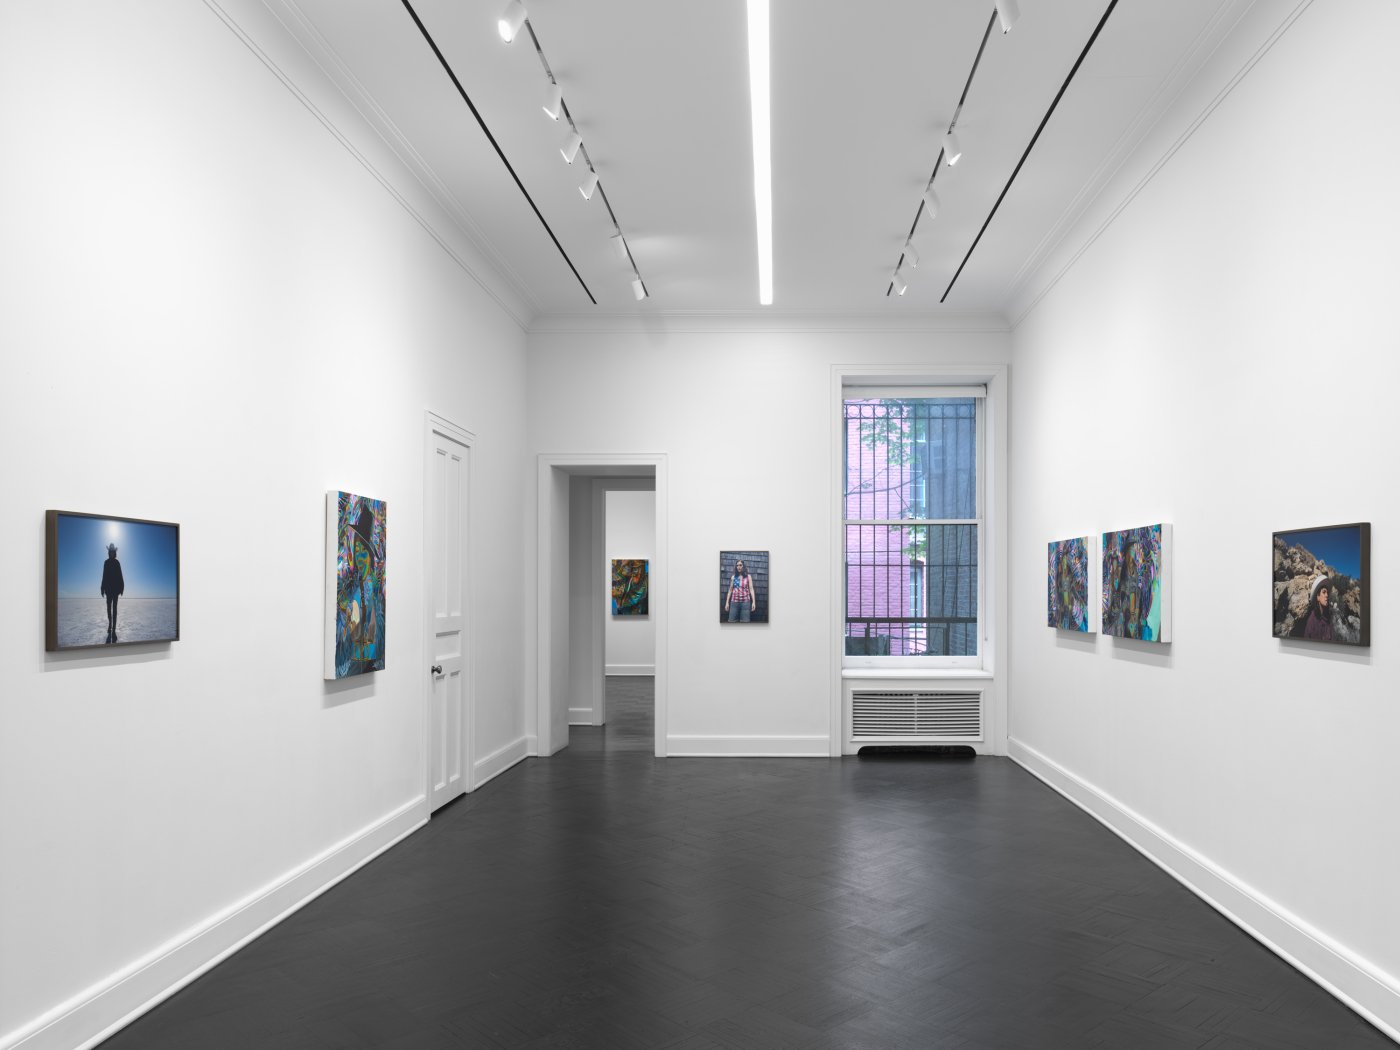 Installation image for Dana Hoey and Caitlin Cherry: Hello Trouble, at Petzel